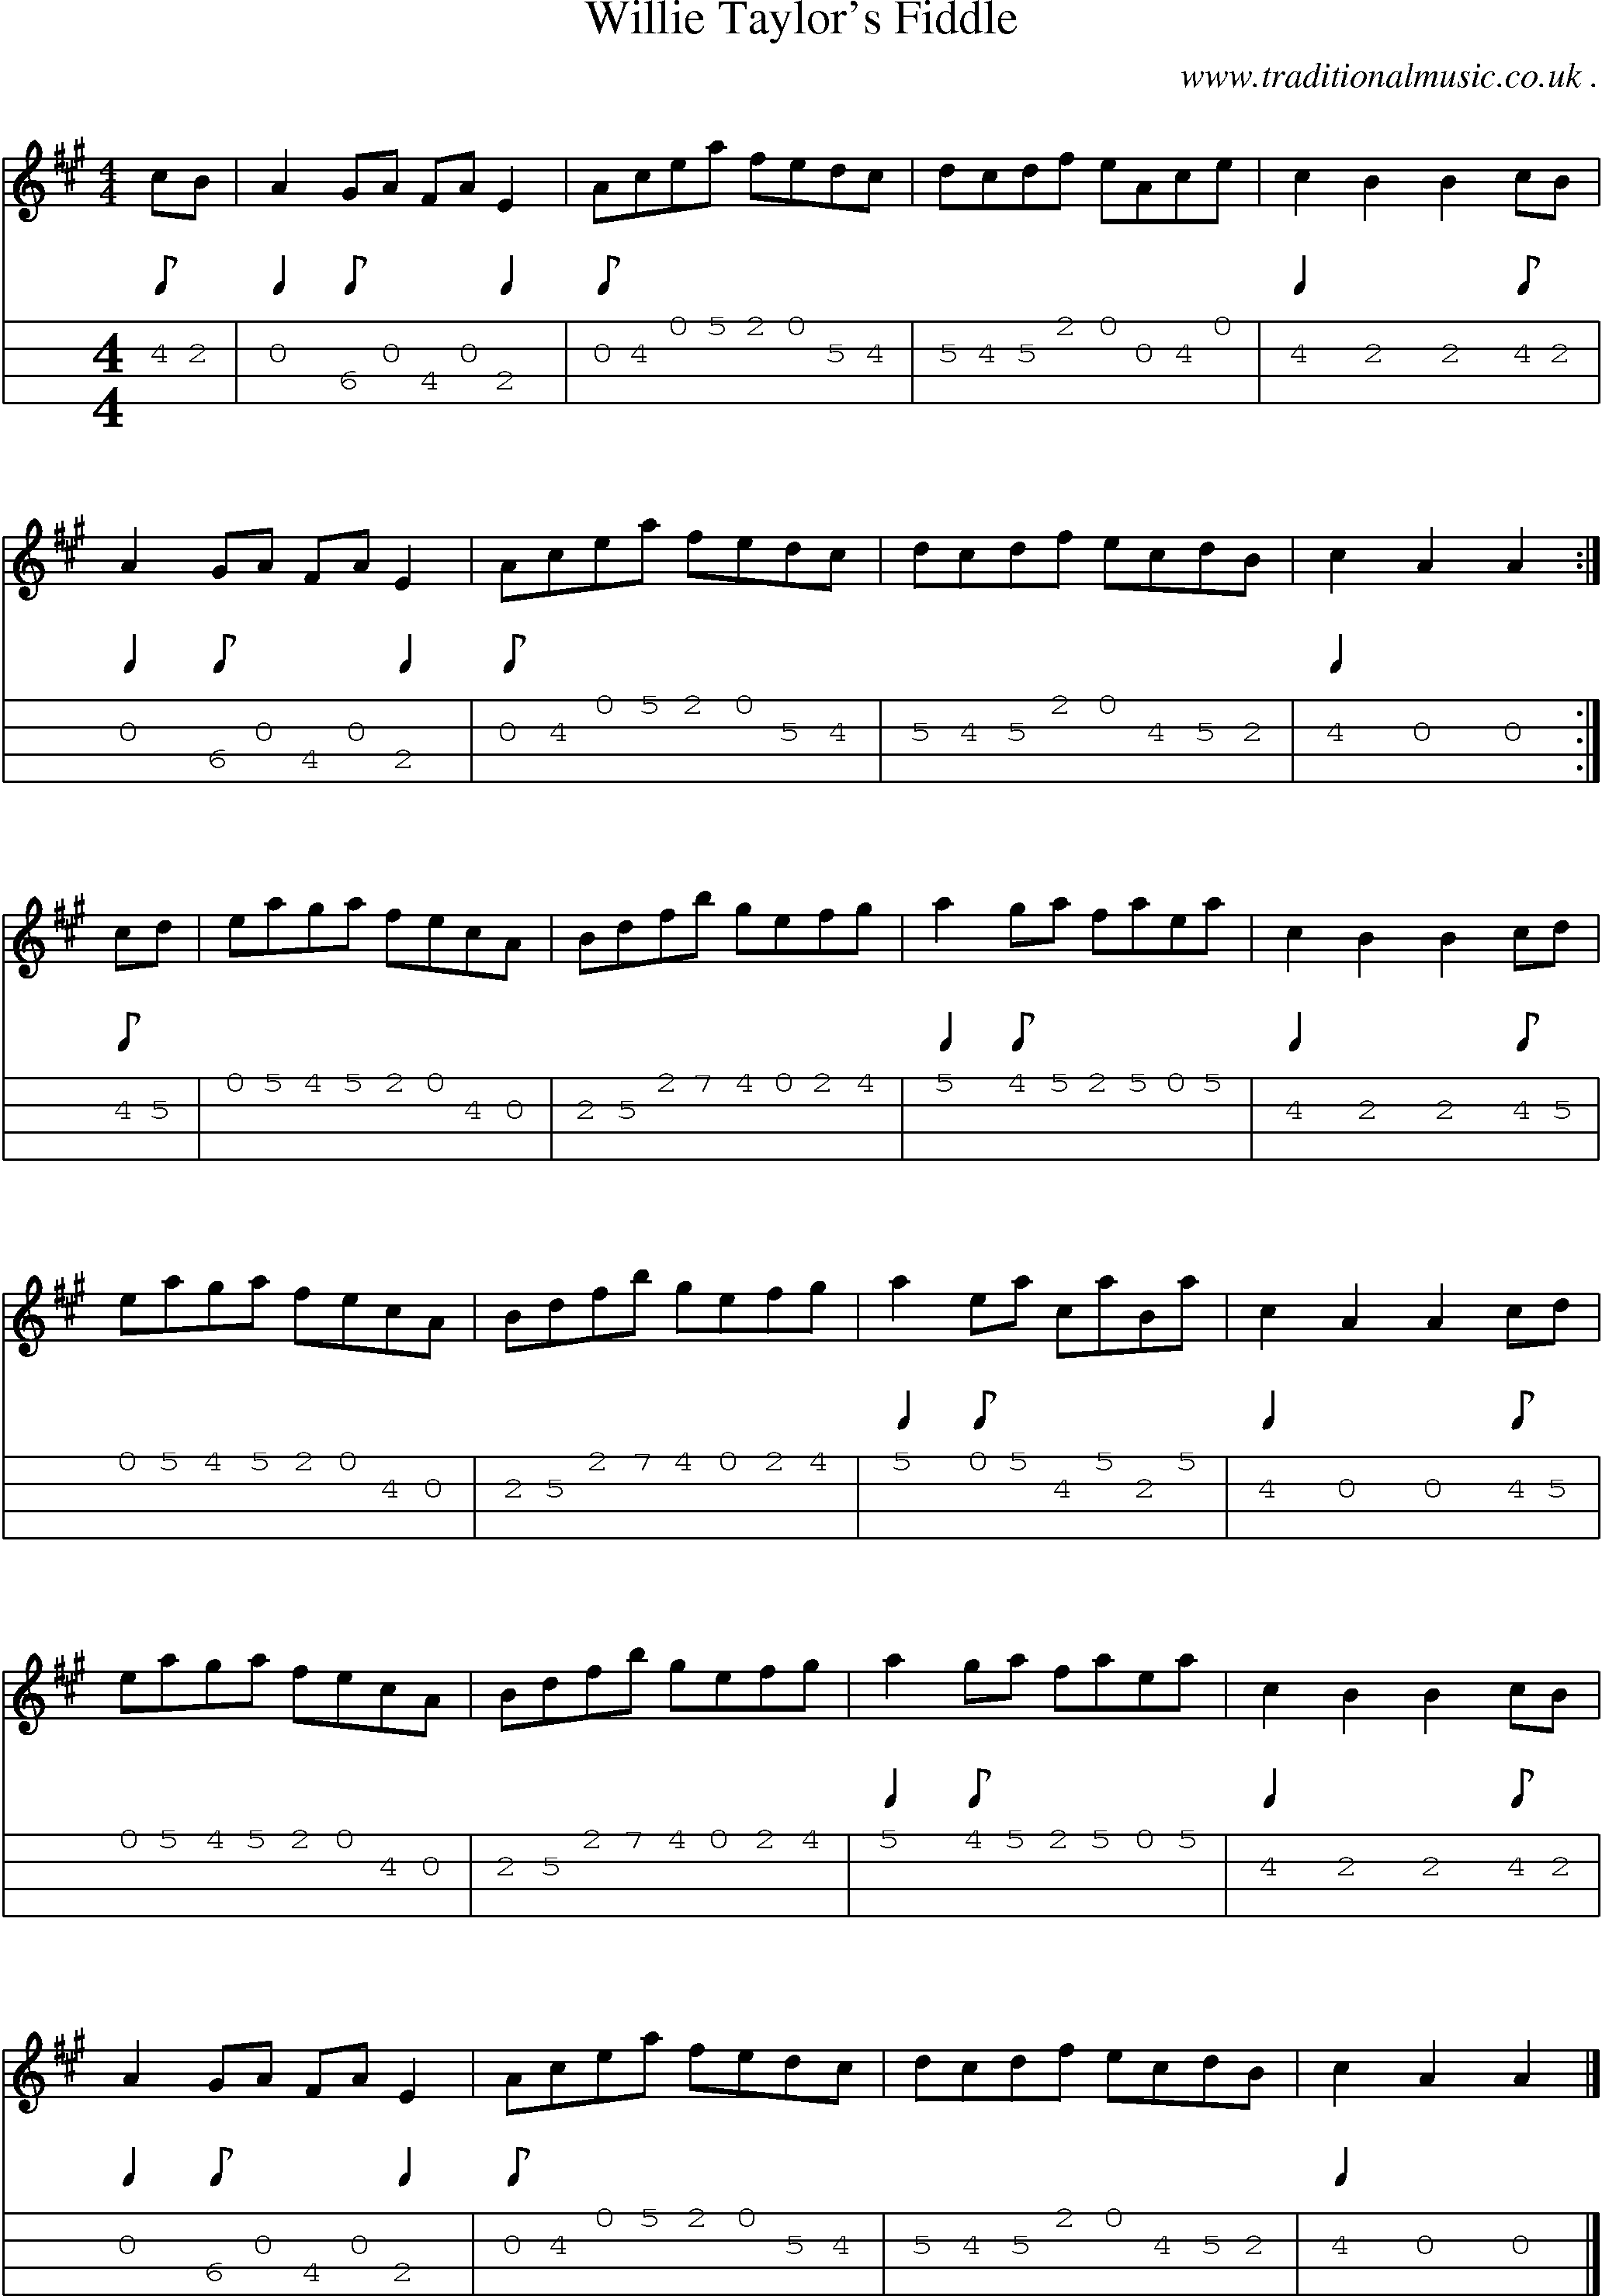 Sheet-music  score, Chords and Mandolin Tabs for Willie Taylors Fiddle